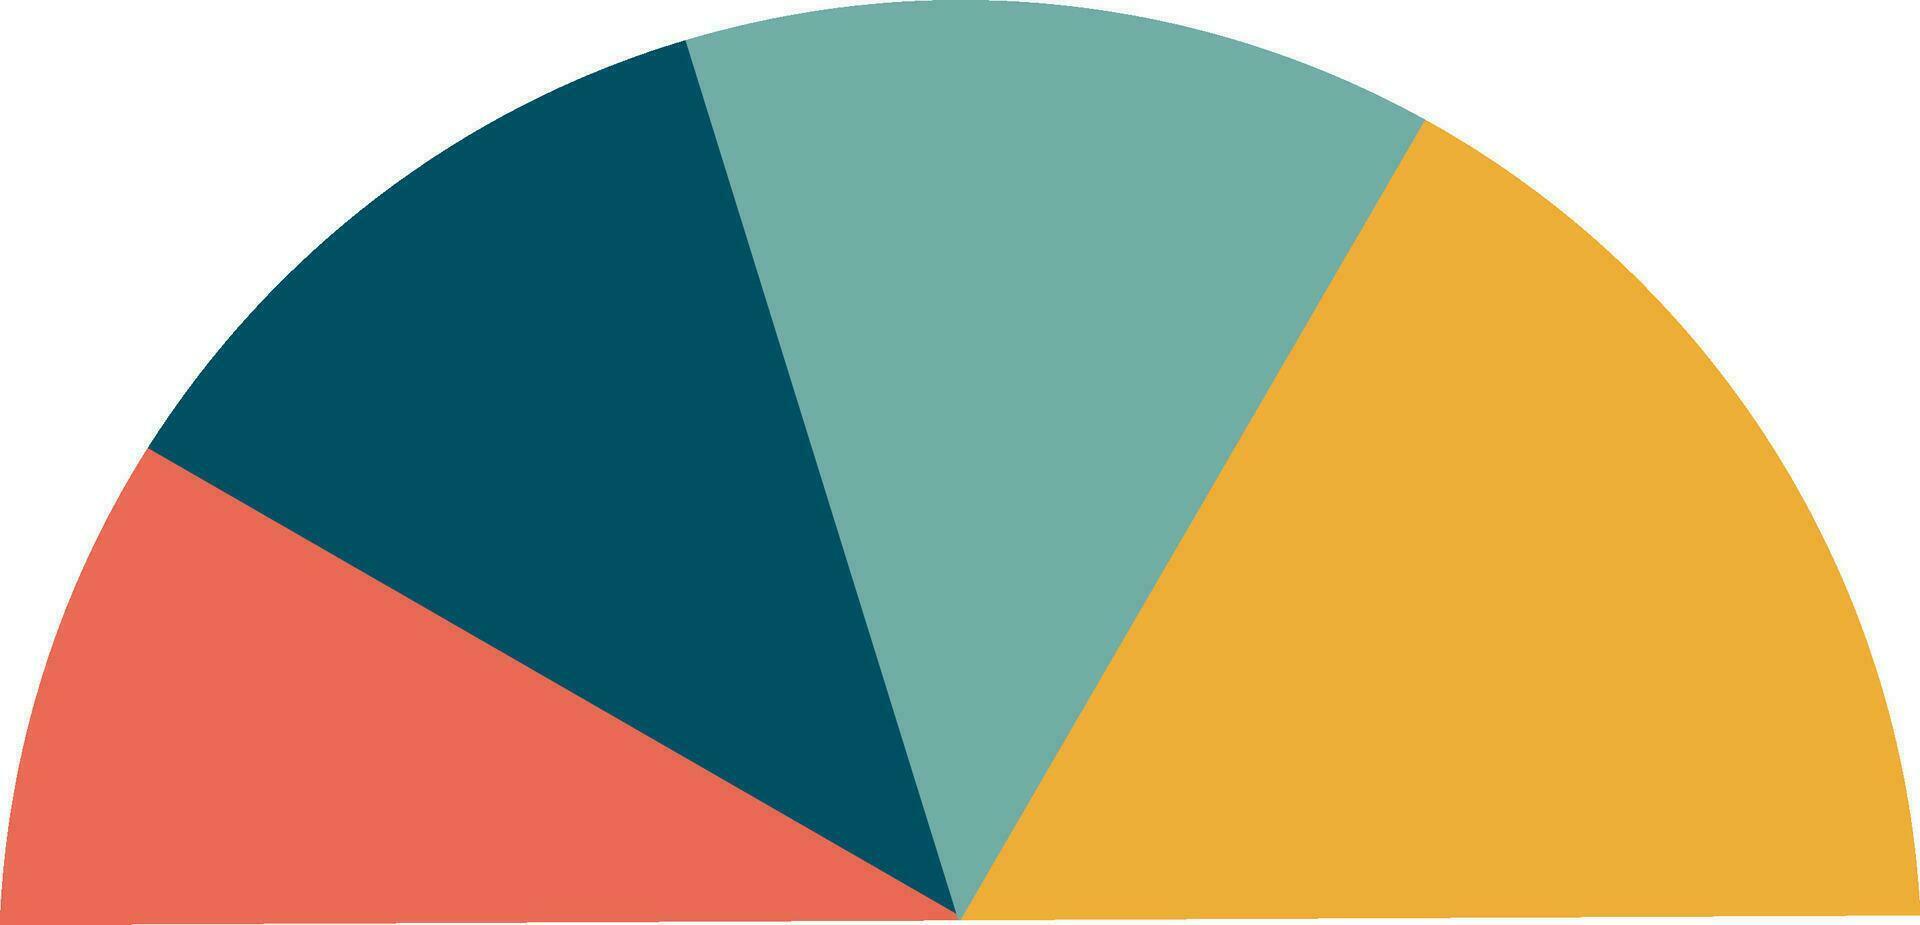 Colorful pie chart infographic element in flat style. vector